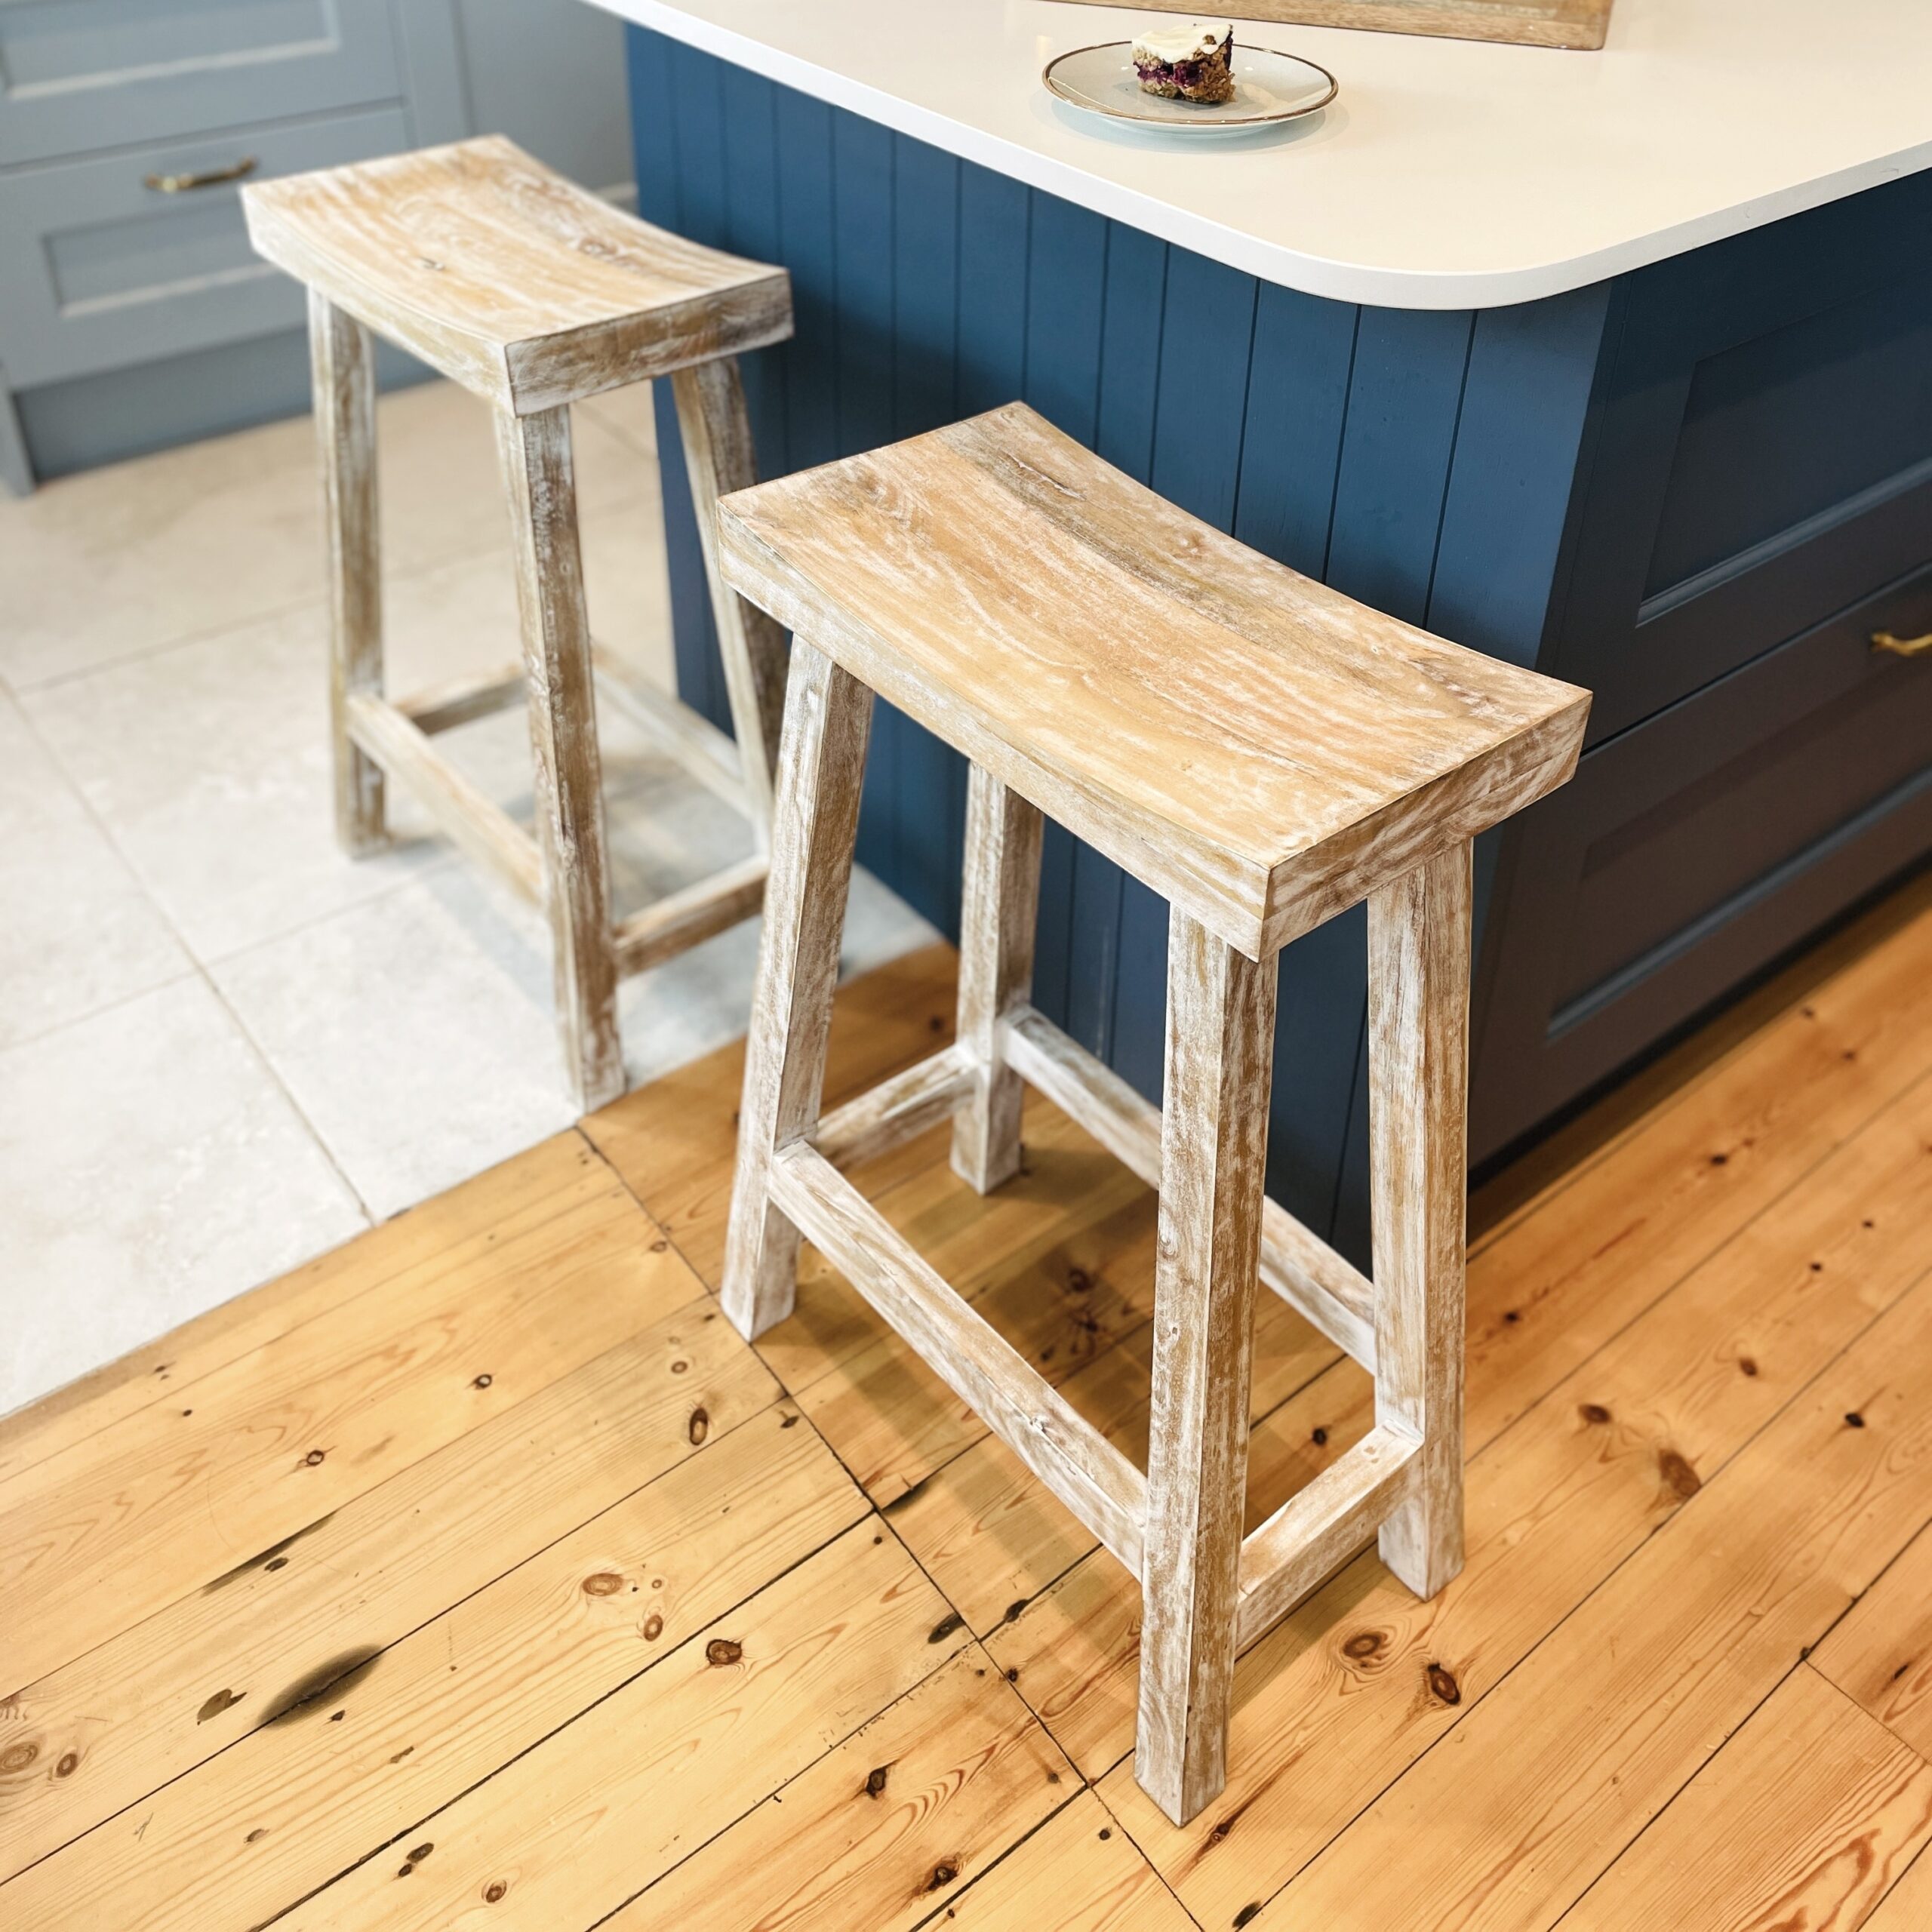 Whitewashed bar stool on wooden floor in front of blue kitchen island